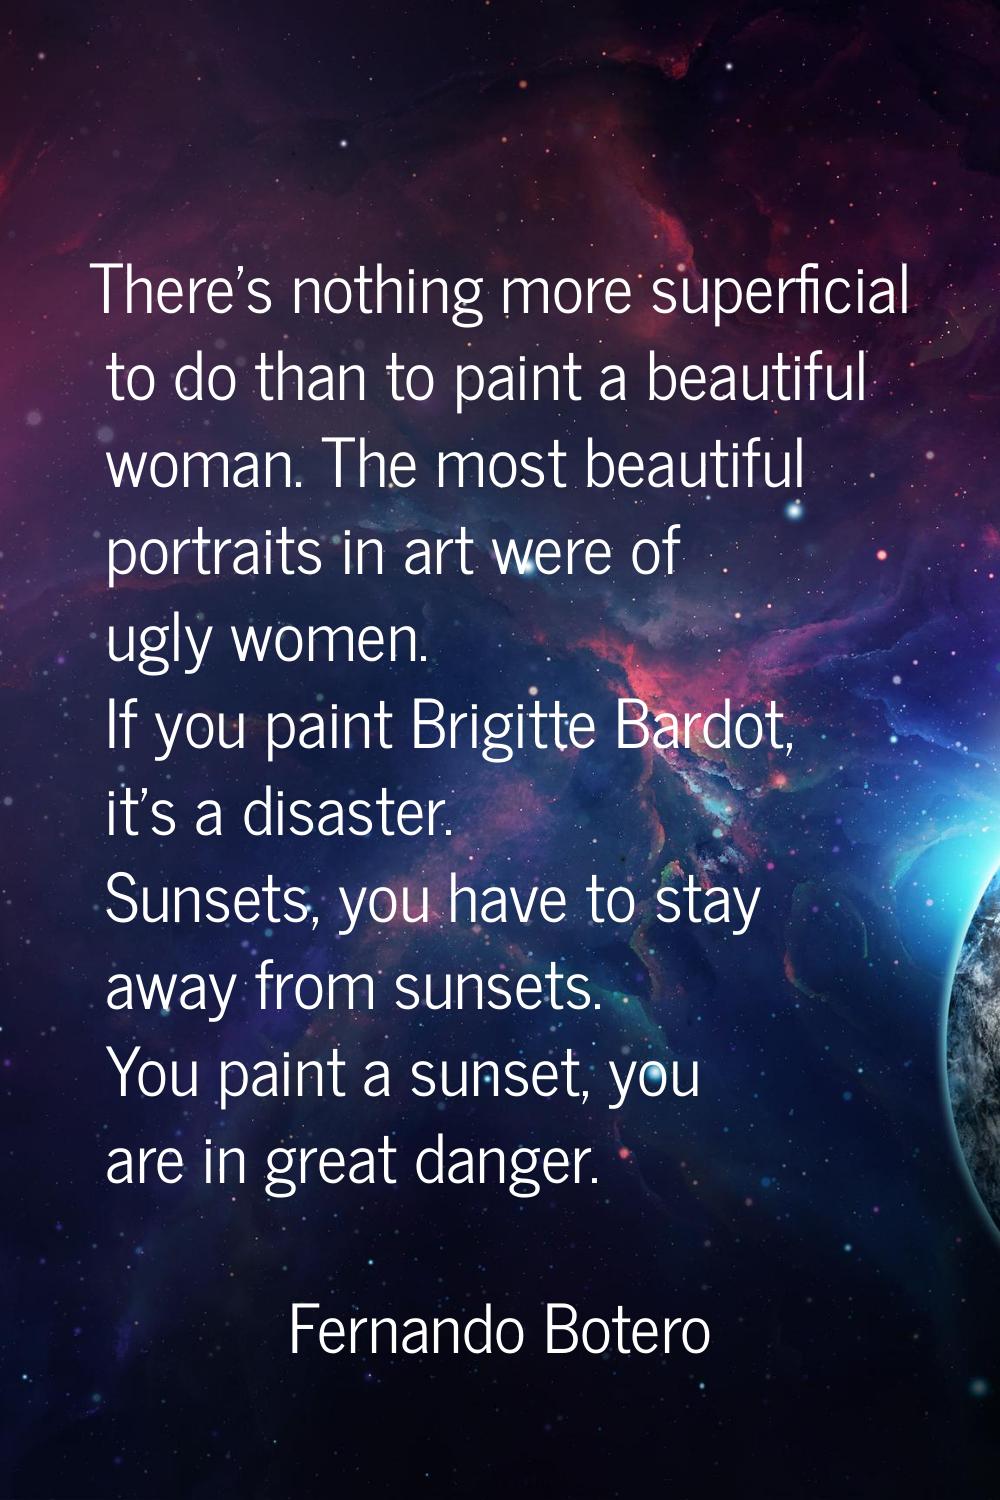 There's nothing more superficial to do than to paint a beautiful woman. The most beautiful portrait